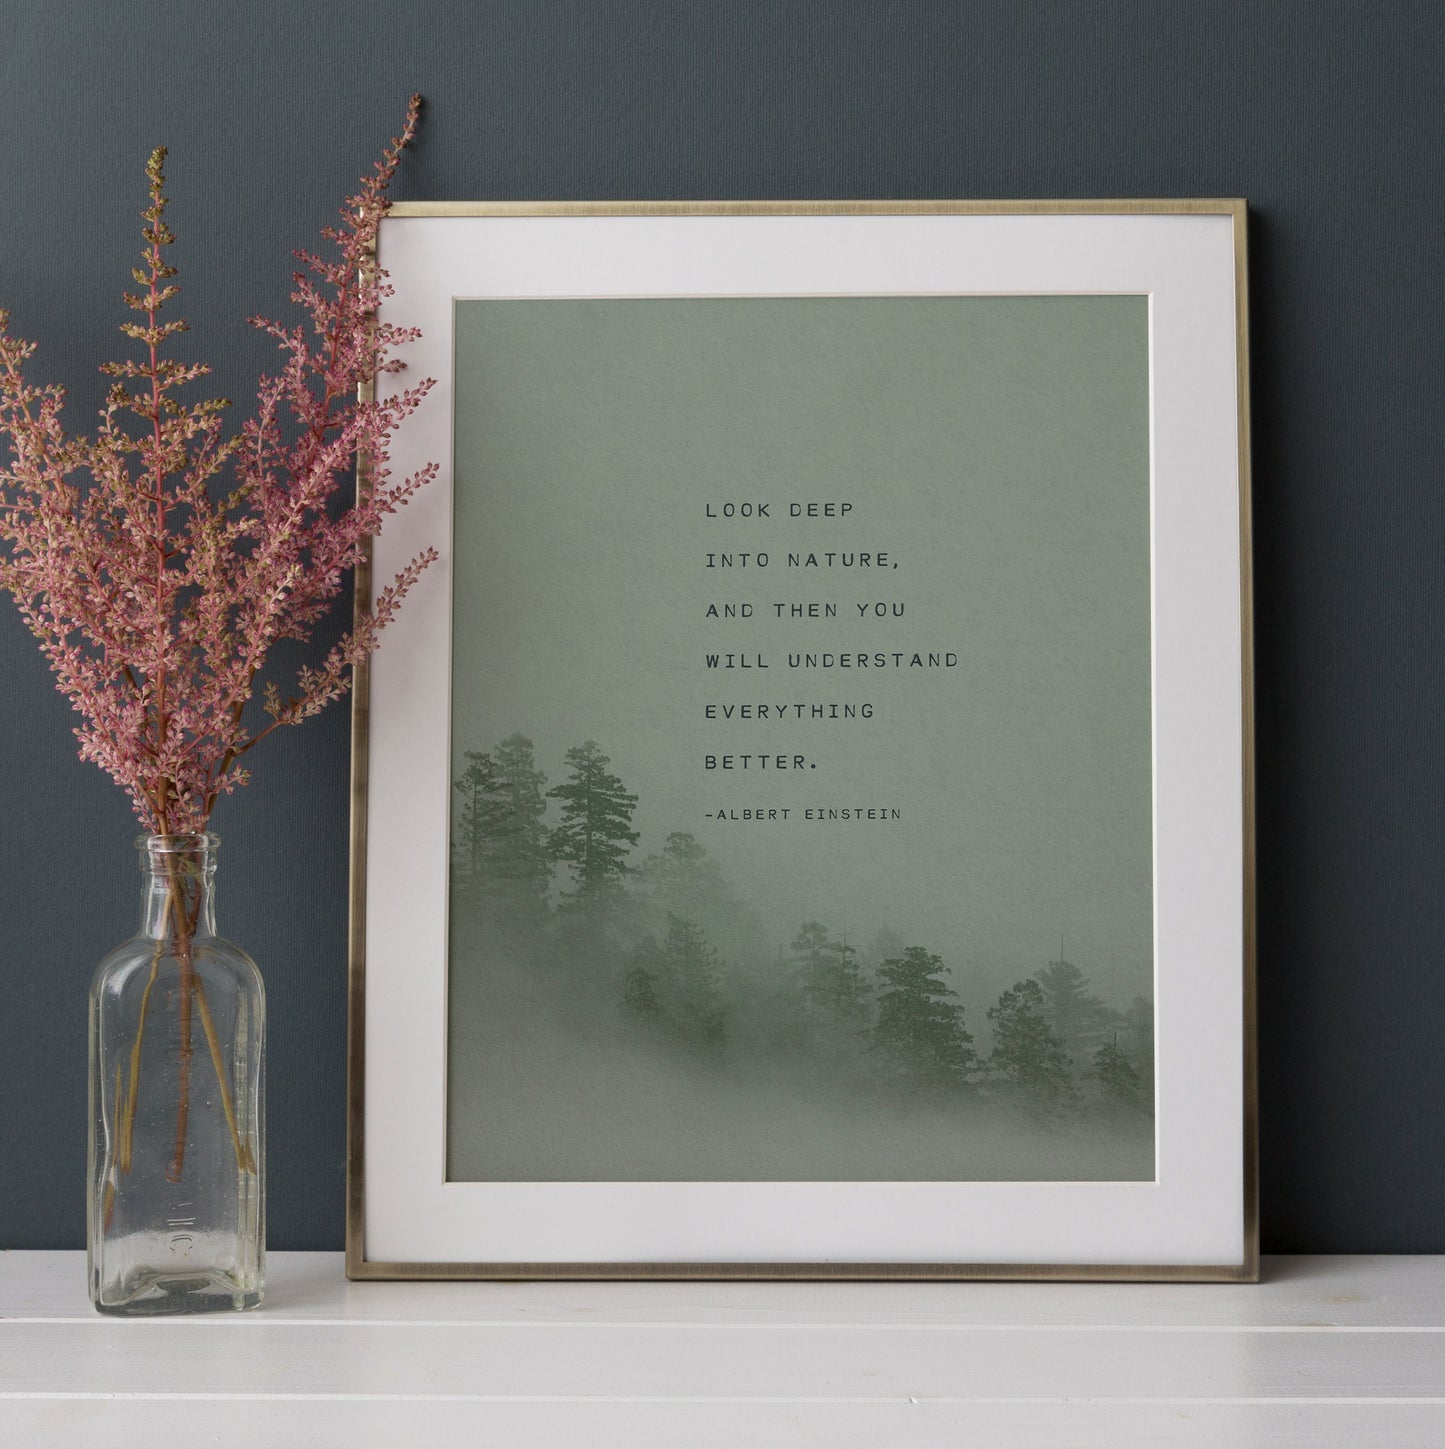 Albert Einstein nature quote print "Look deep into nature, and then you will understand everything better". Art for men.